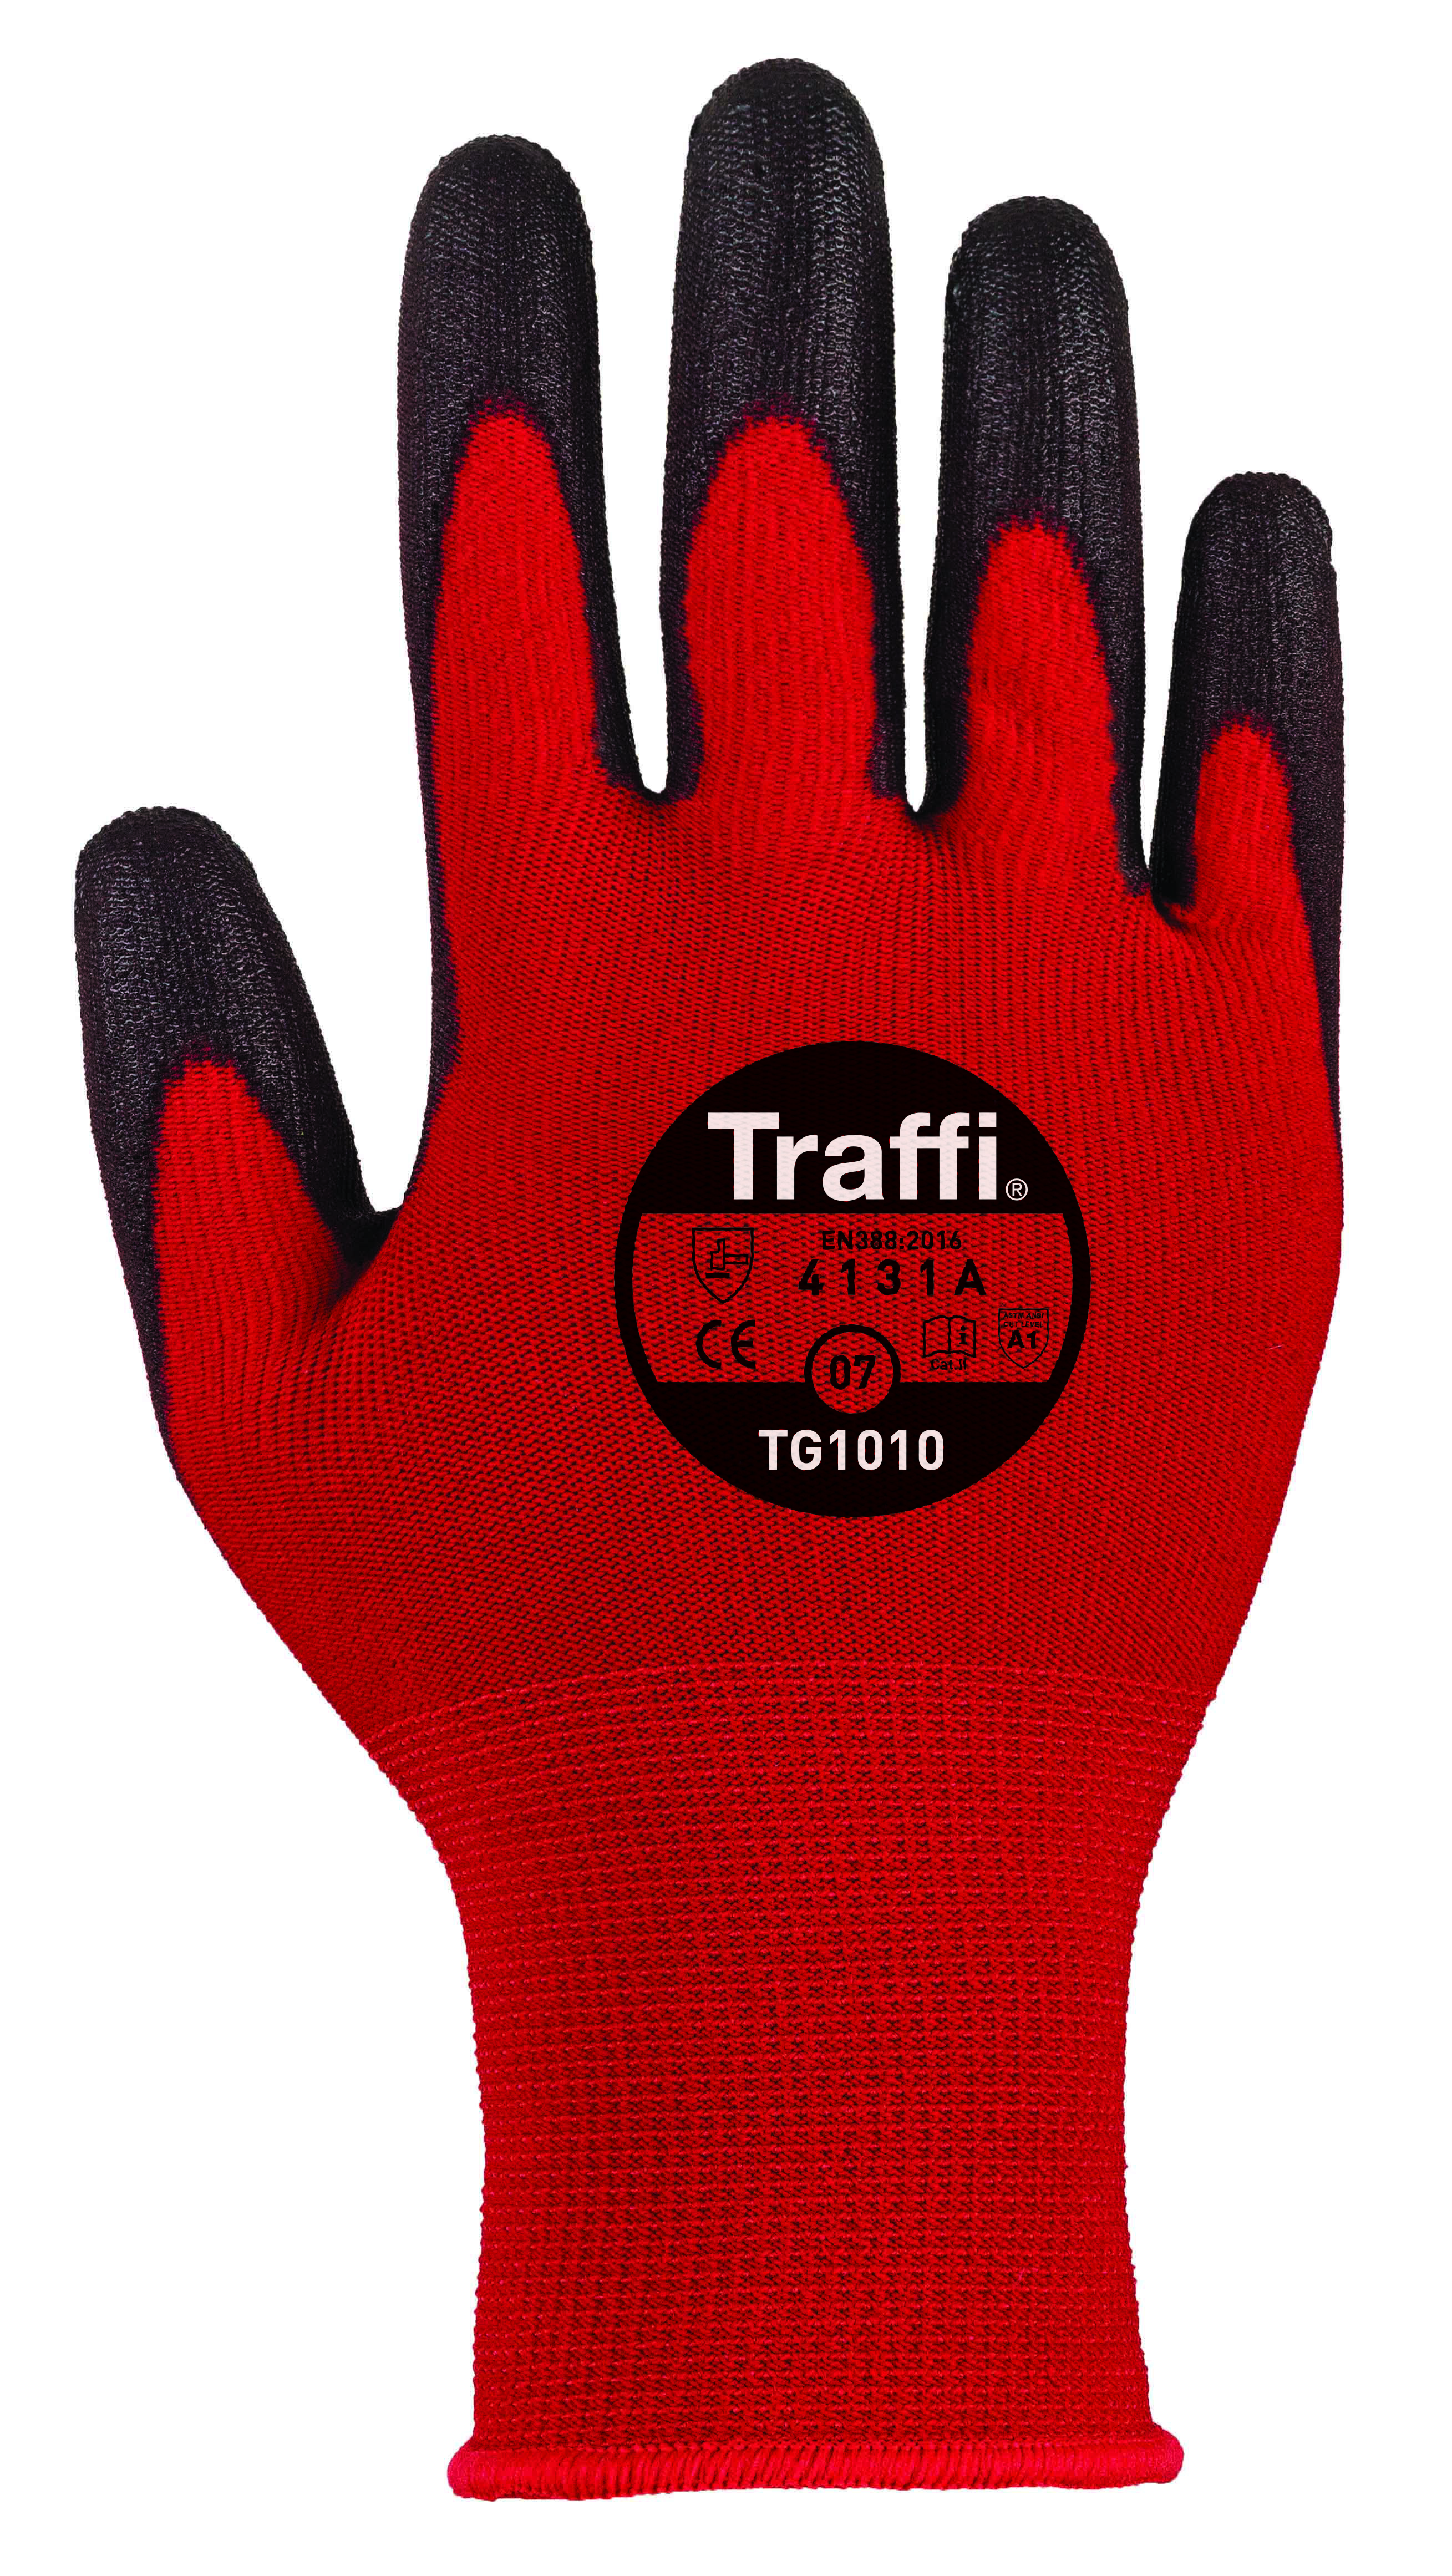 Traffiglove X-dura Pu Palm Dipped Gloves - Size 8 - Pack Of 10 Pairs